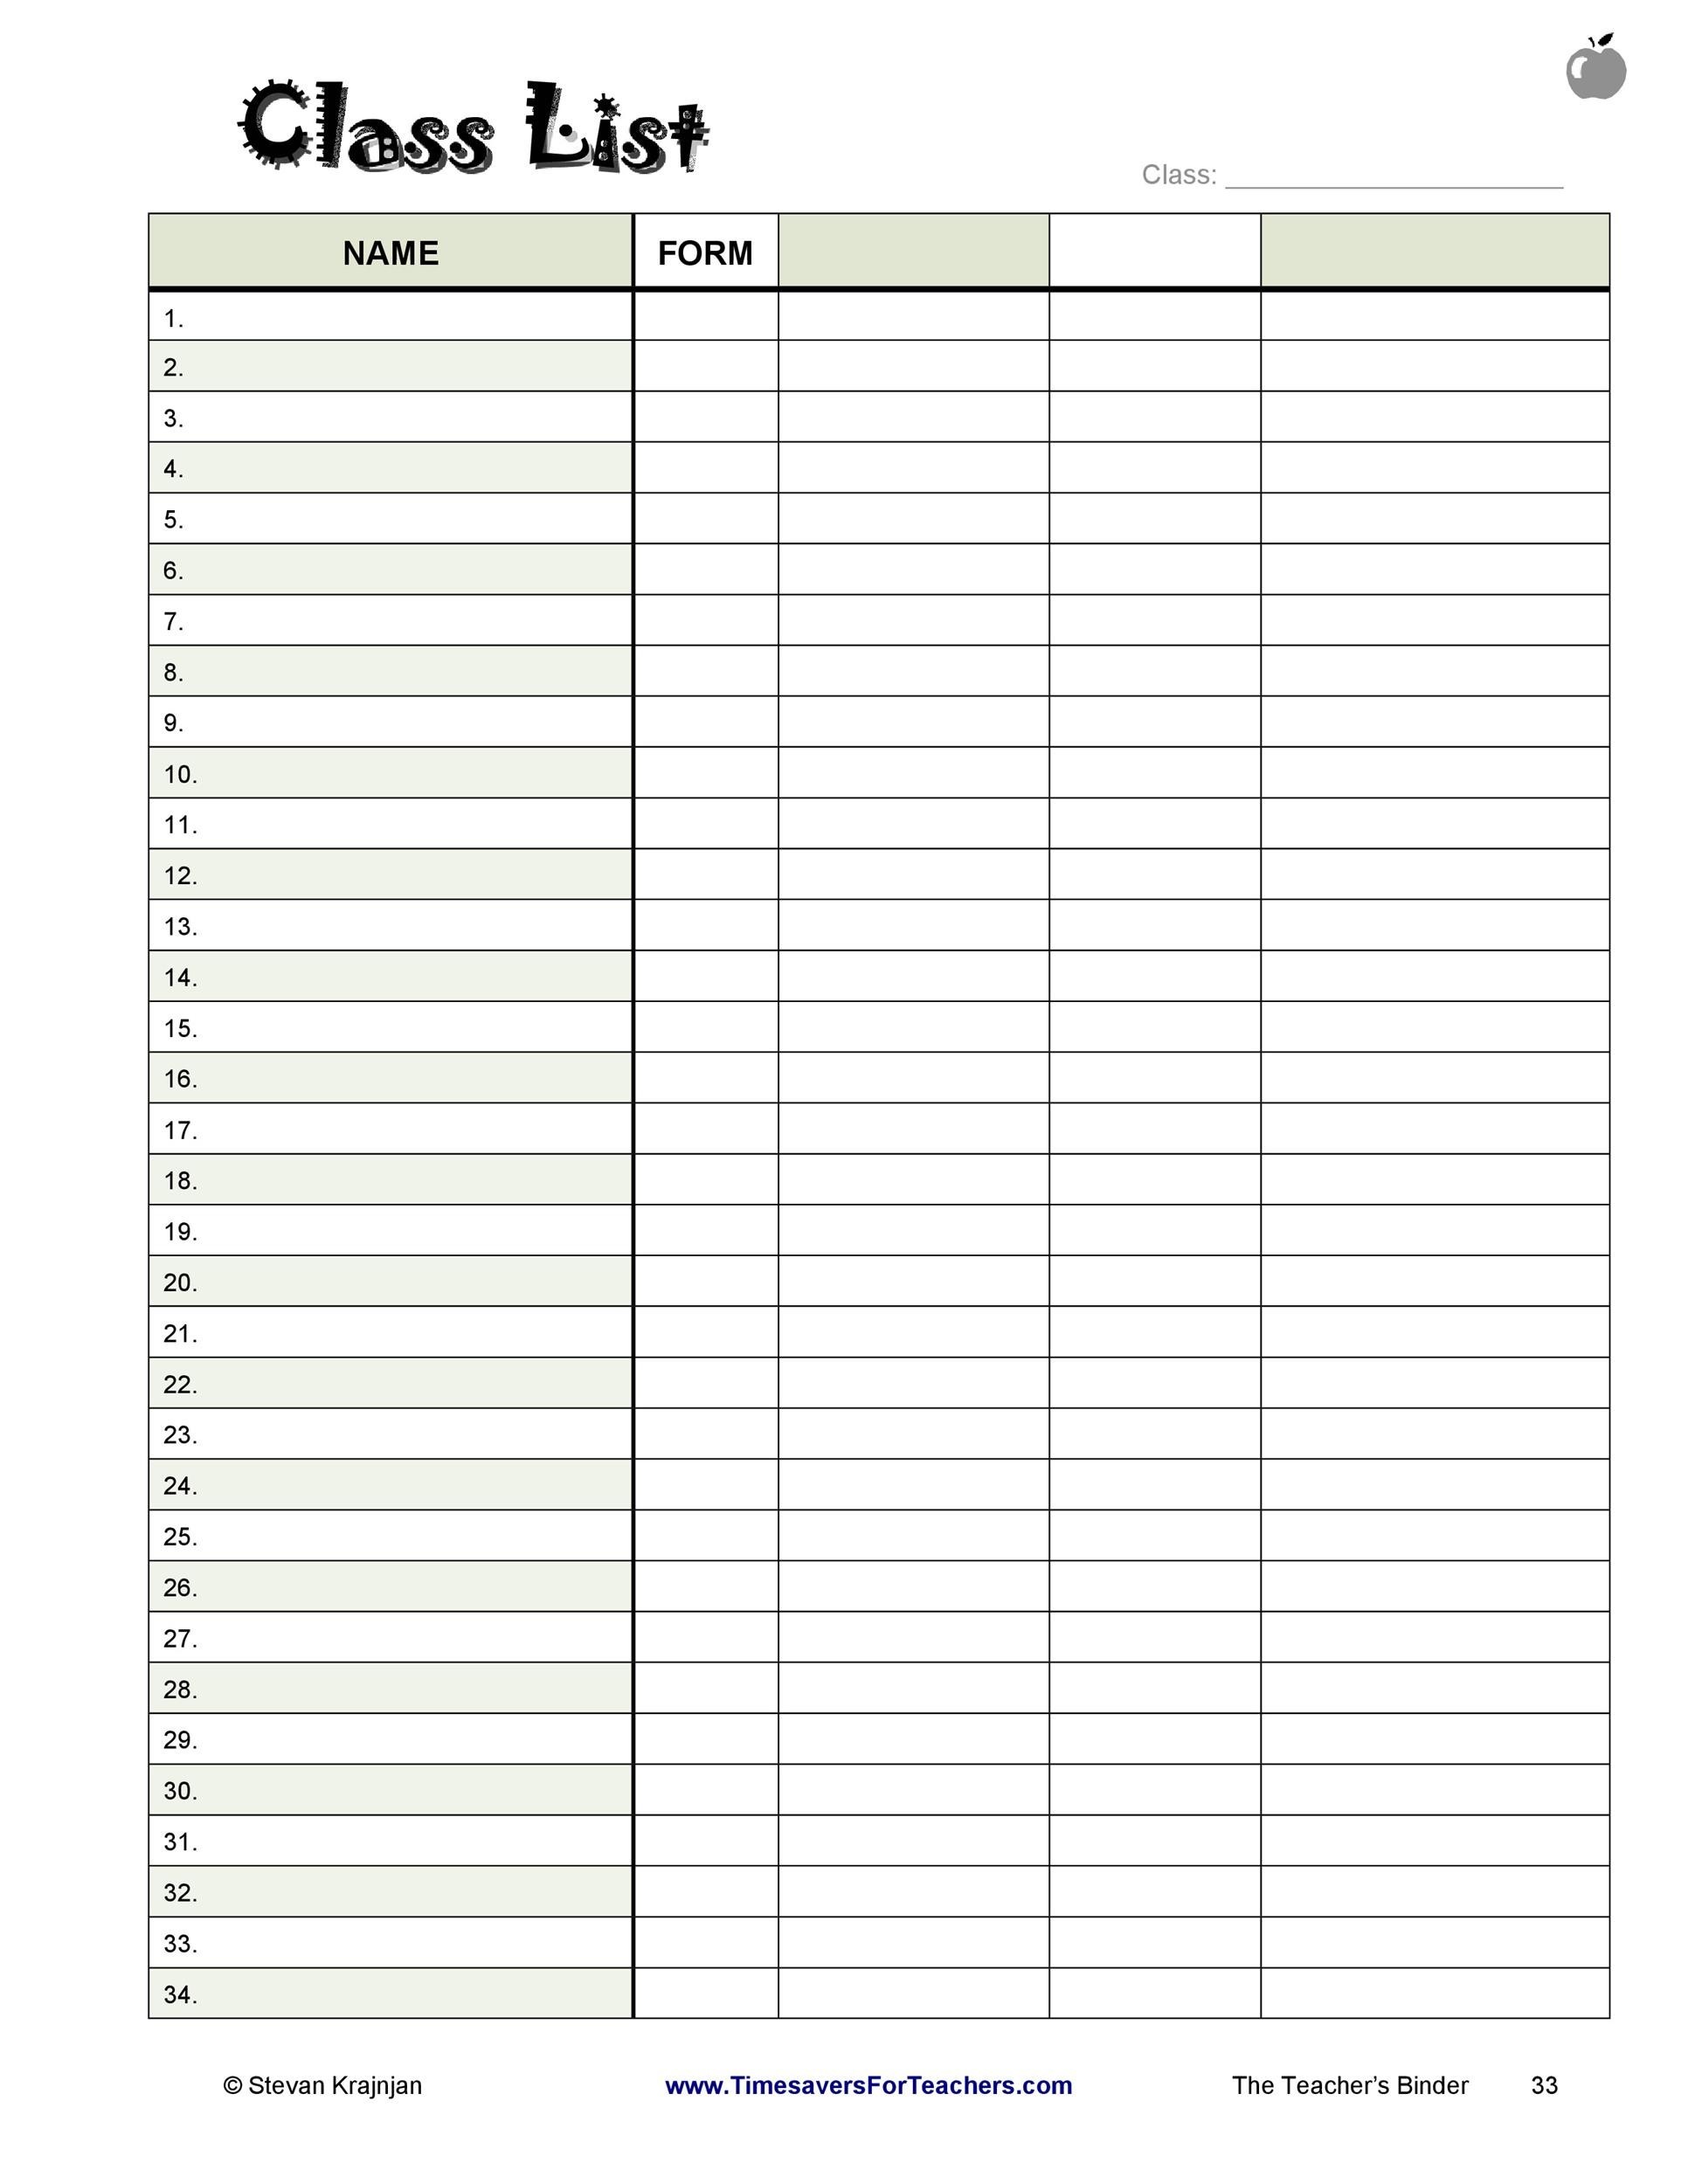 printable-roster-template